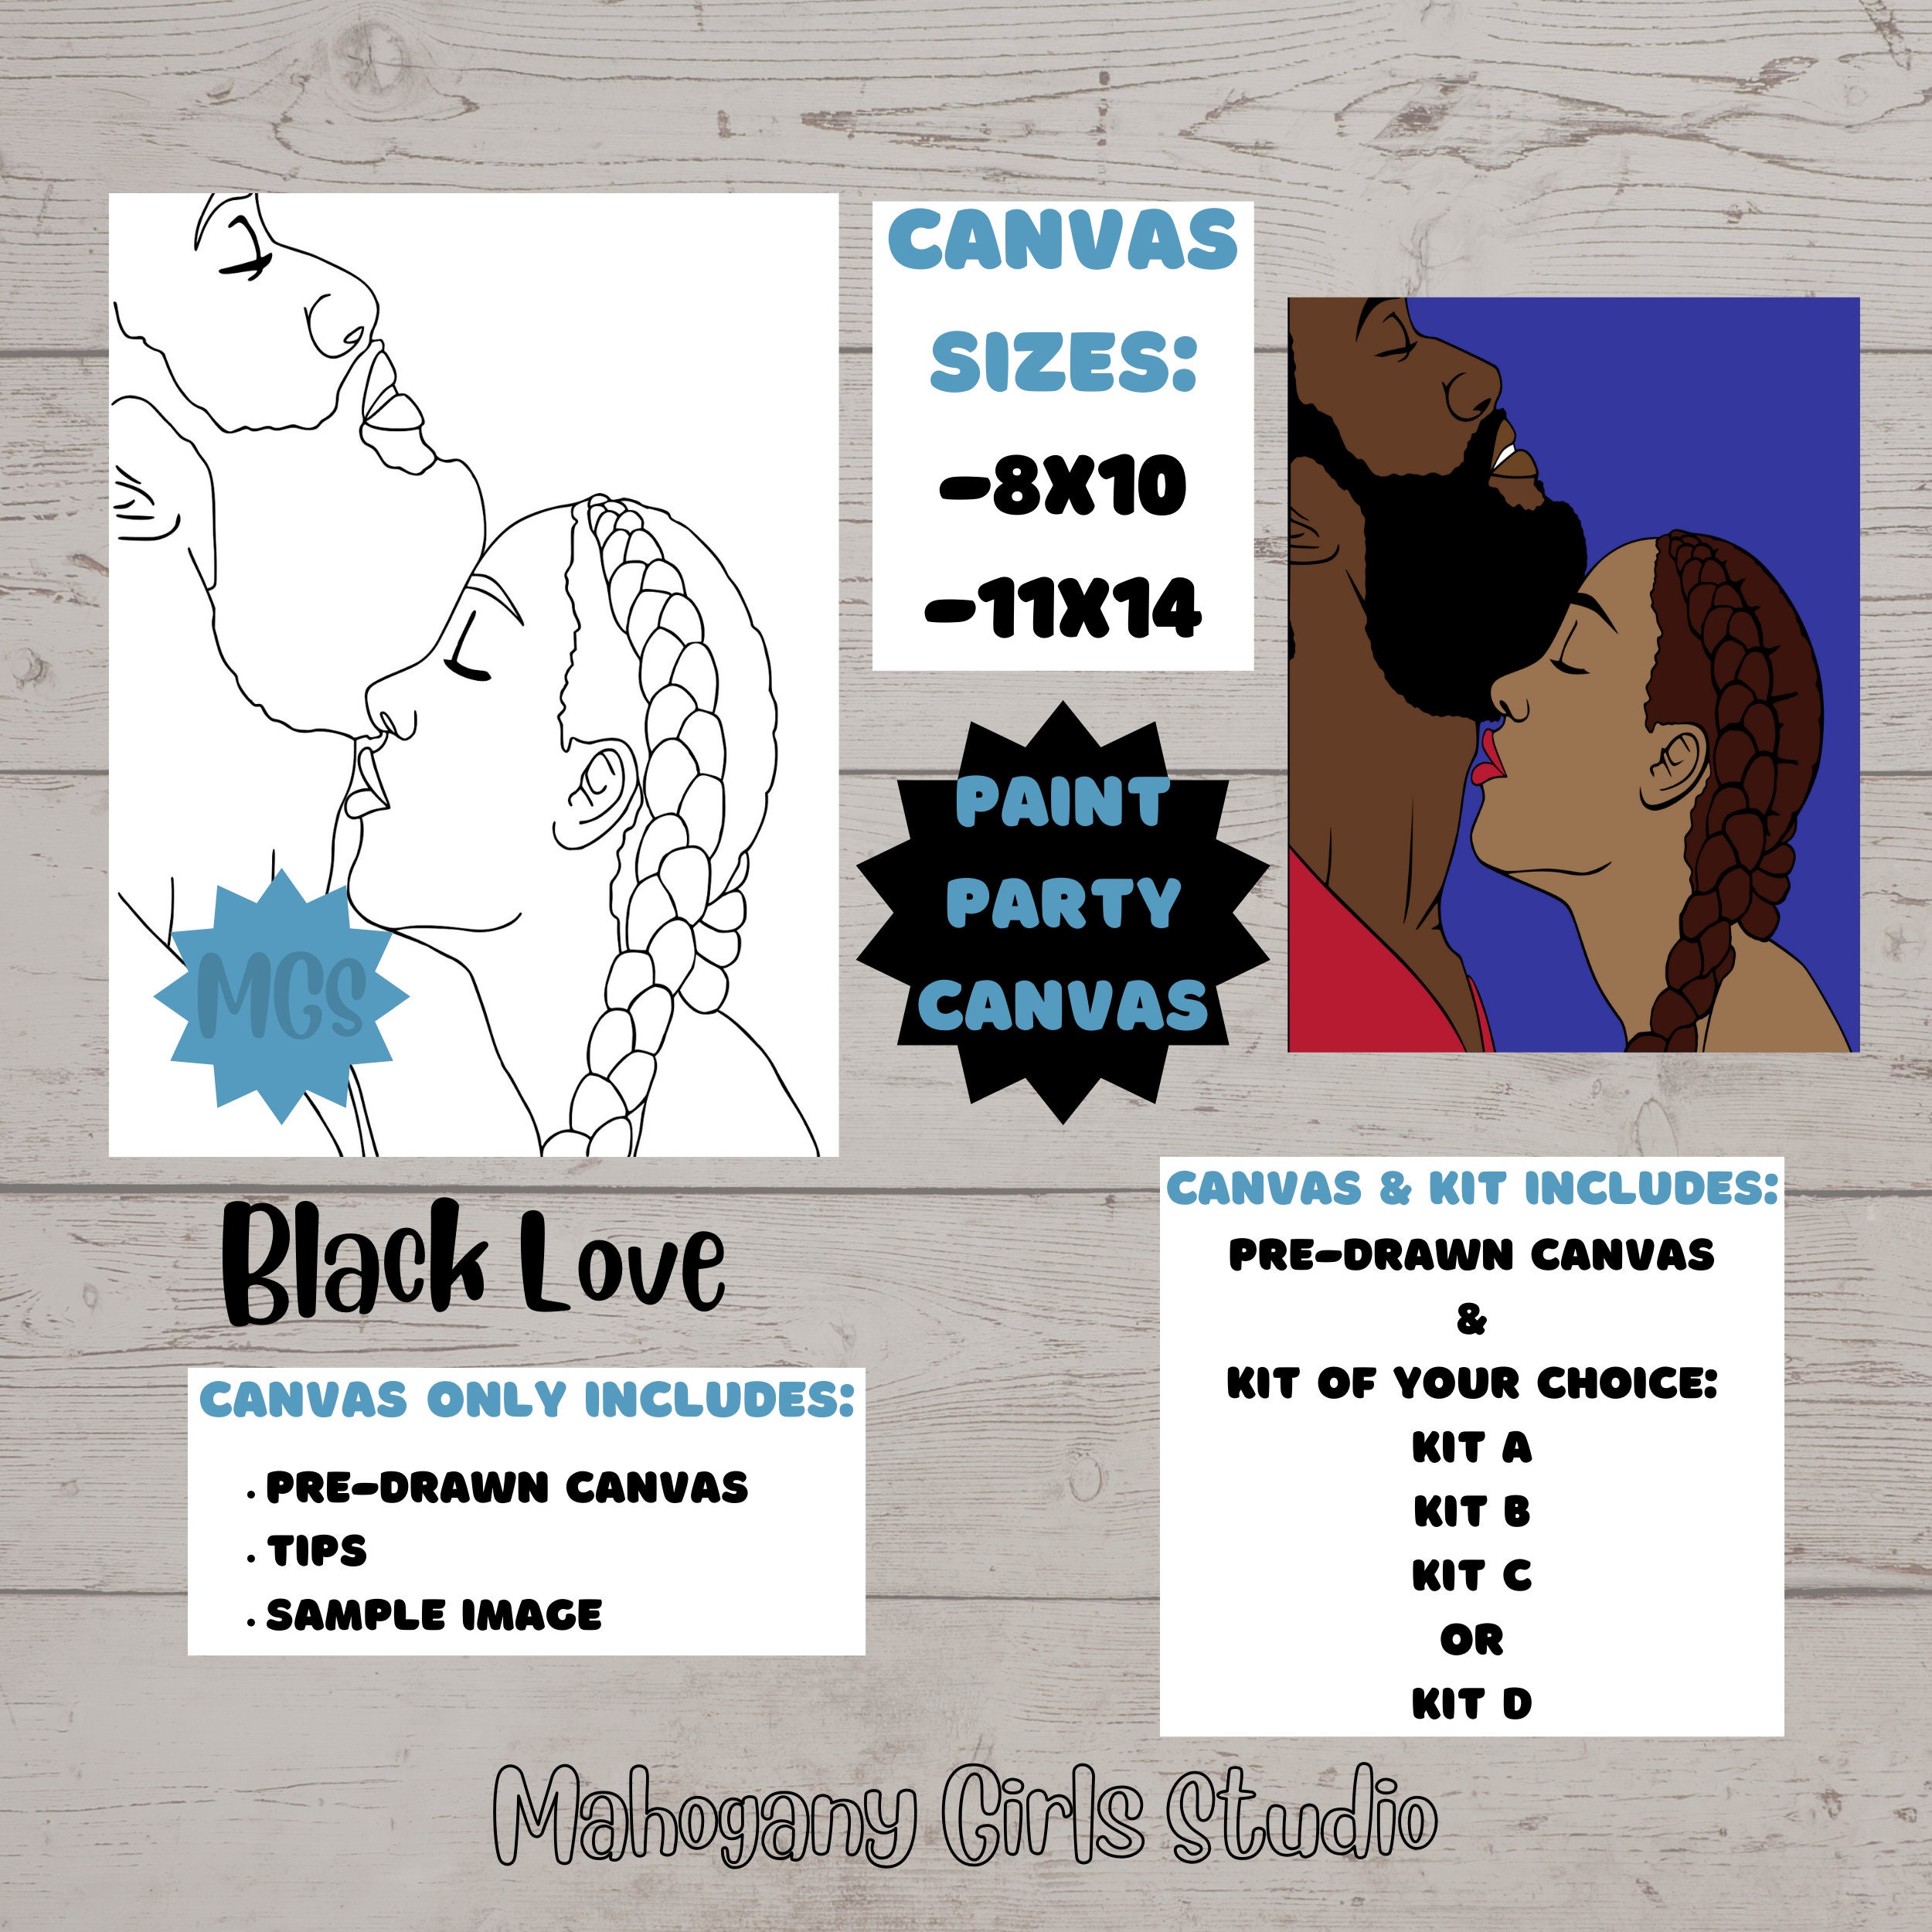 Black Love / Pre-drawn Canvas / Pre-sketched Canvas / Outlined